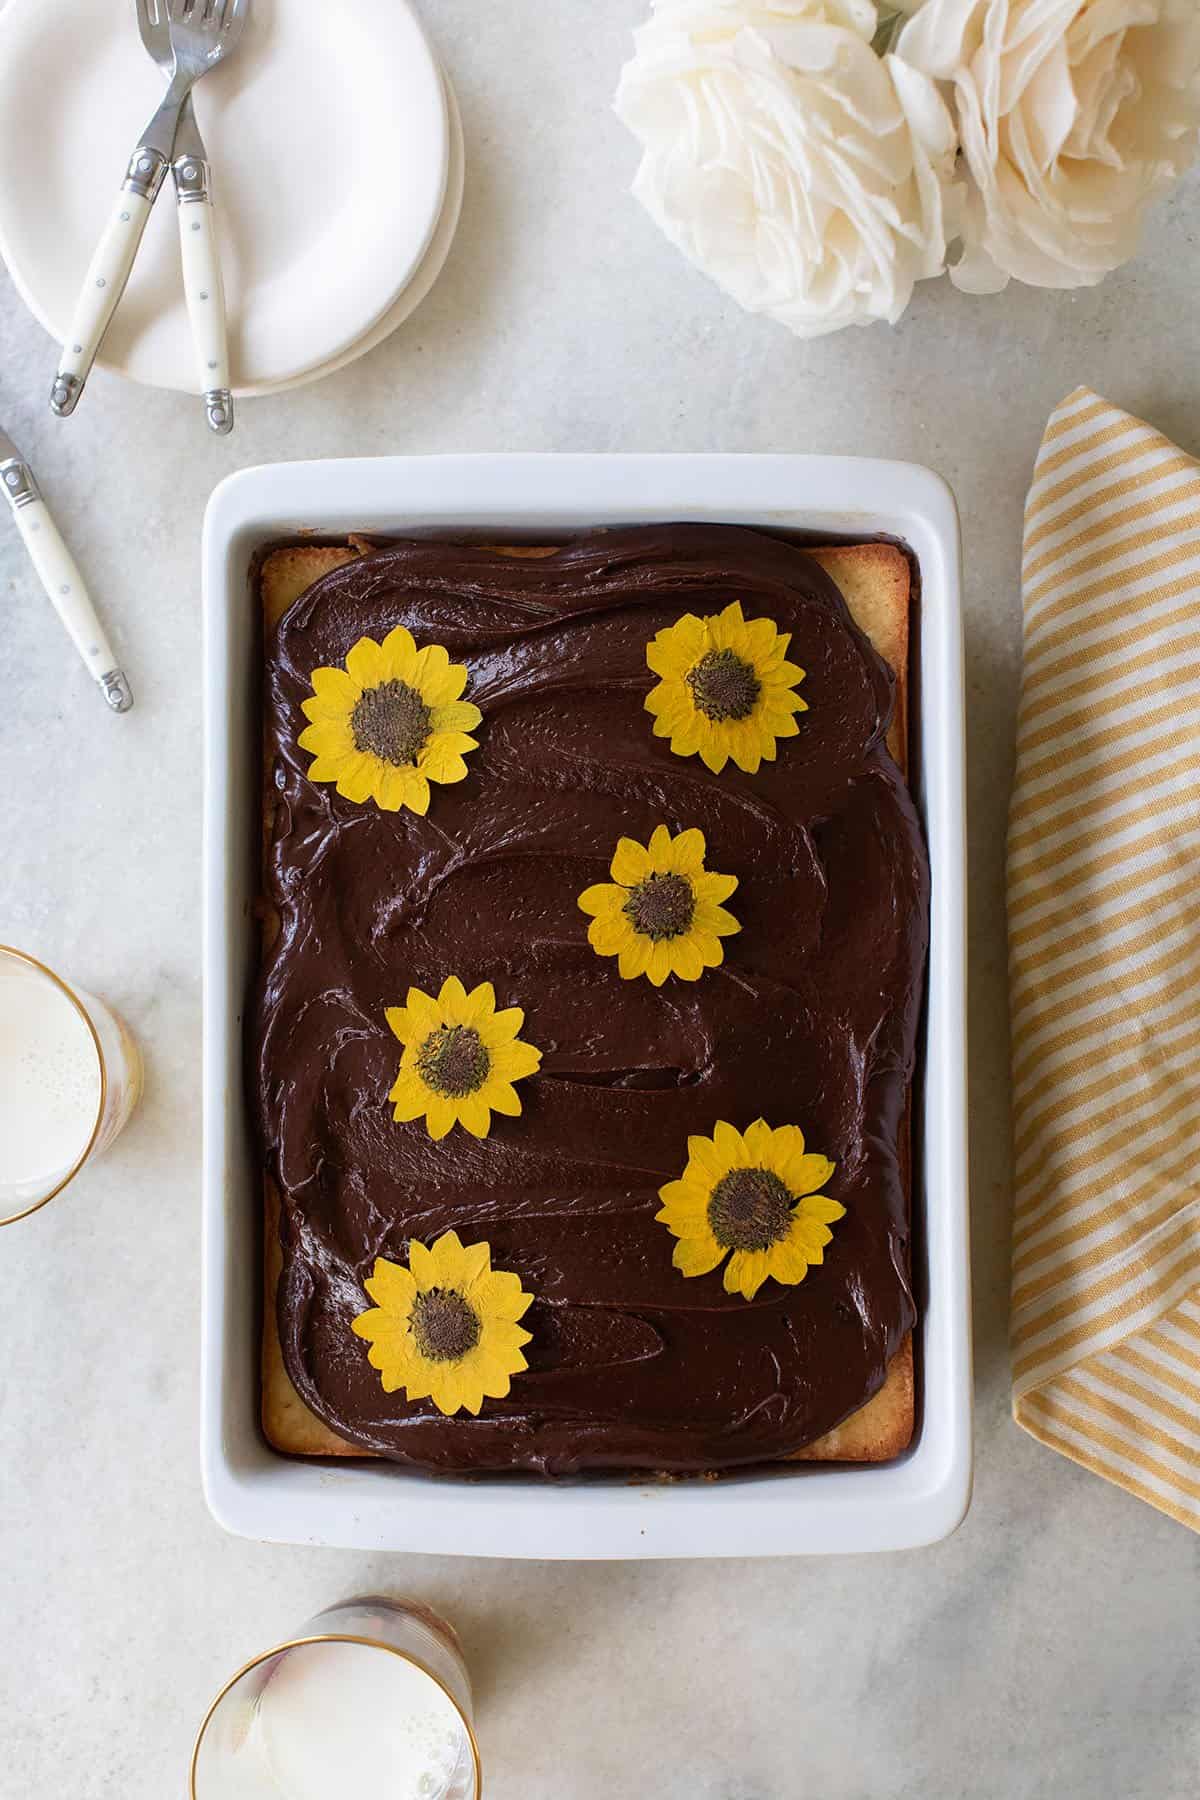 The best buutermilk cake recipe with chocolate frosting and edible flowers on the top